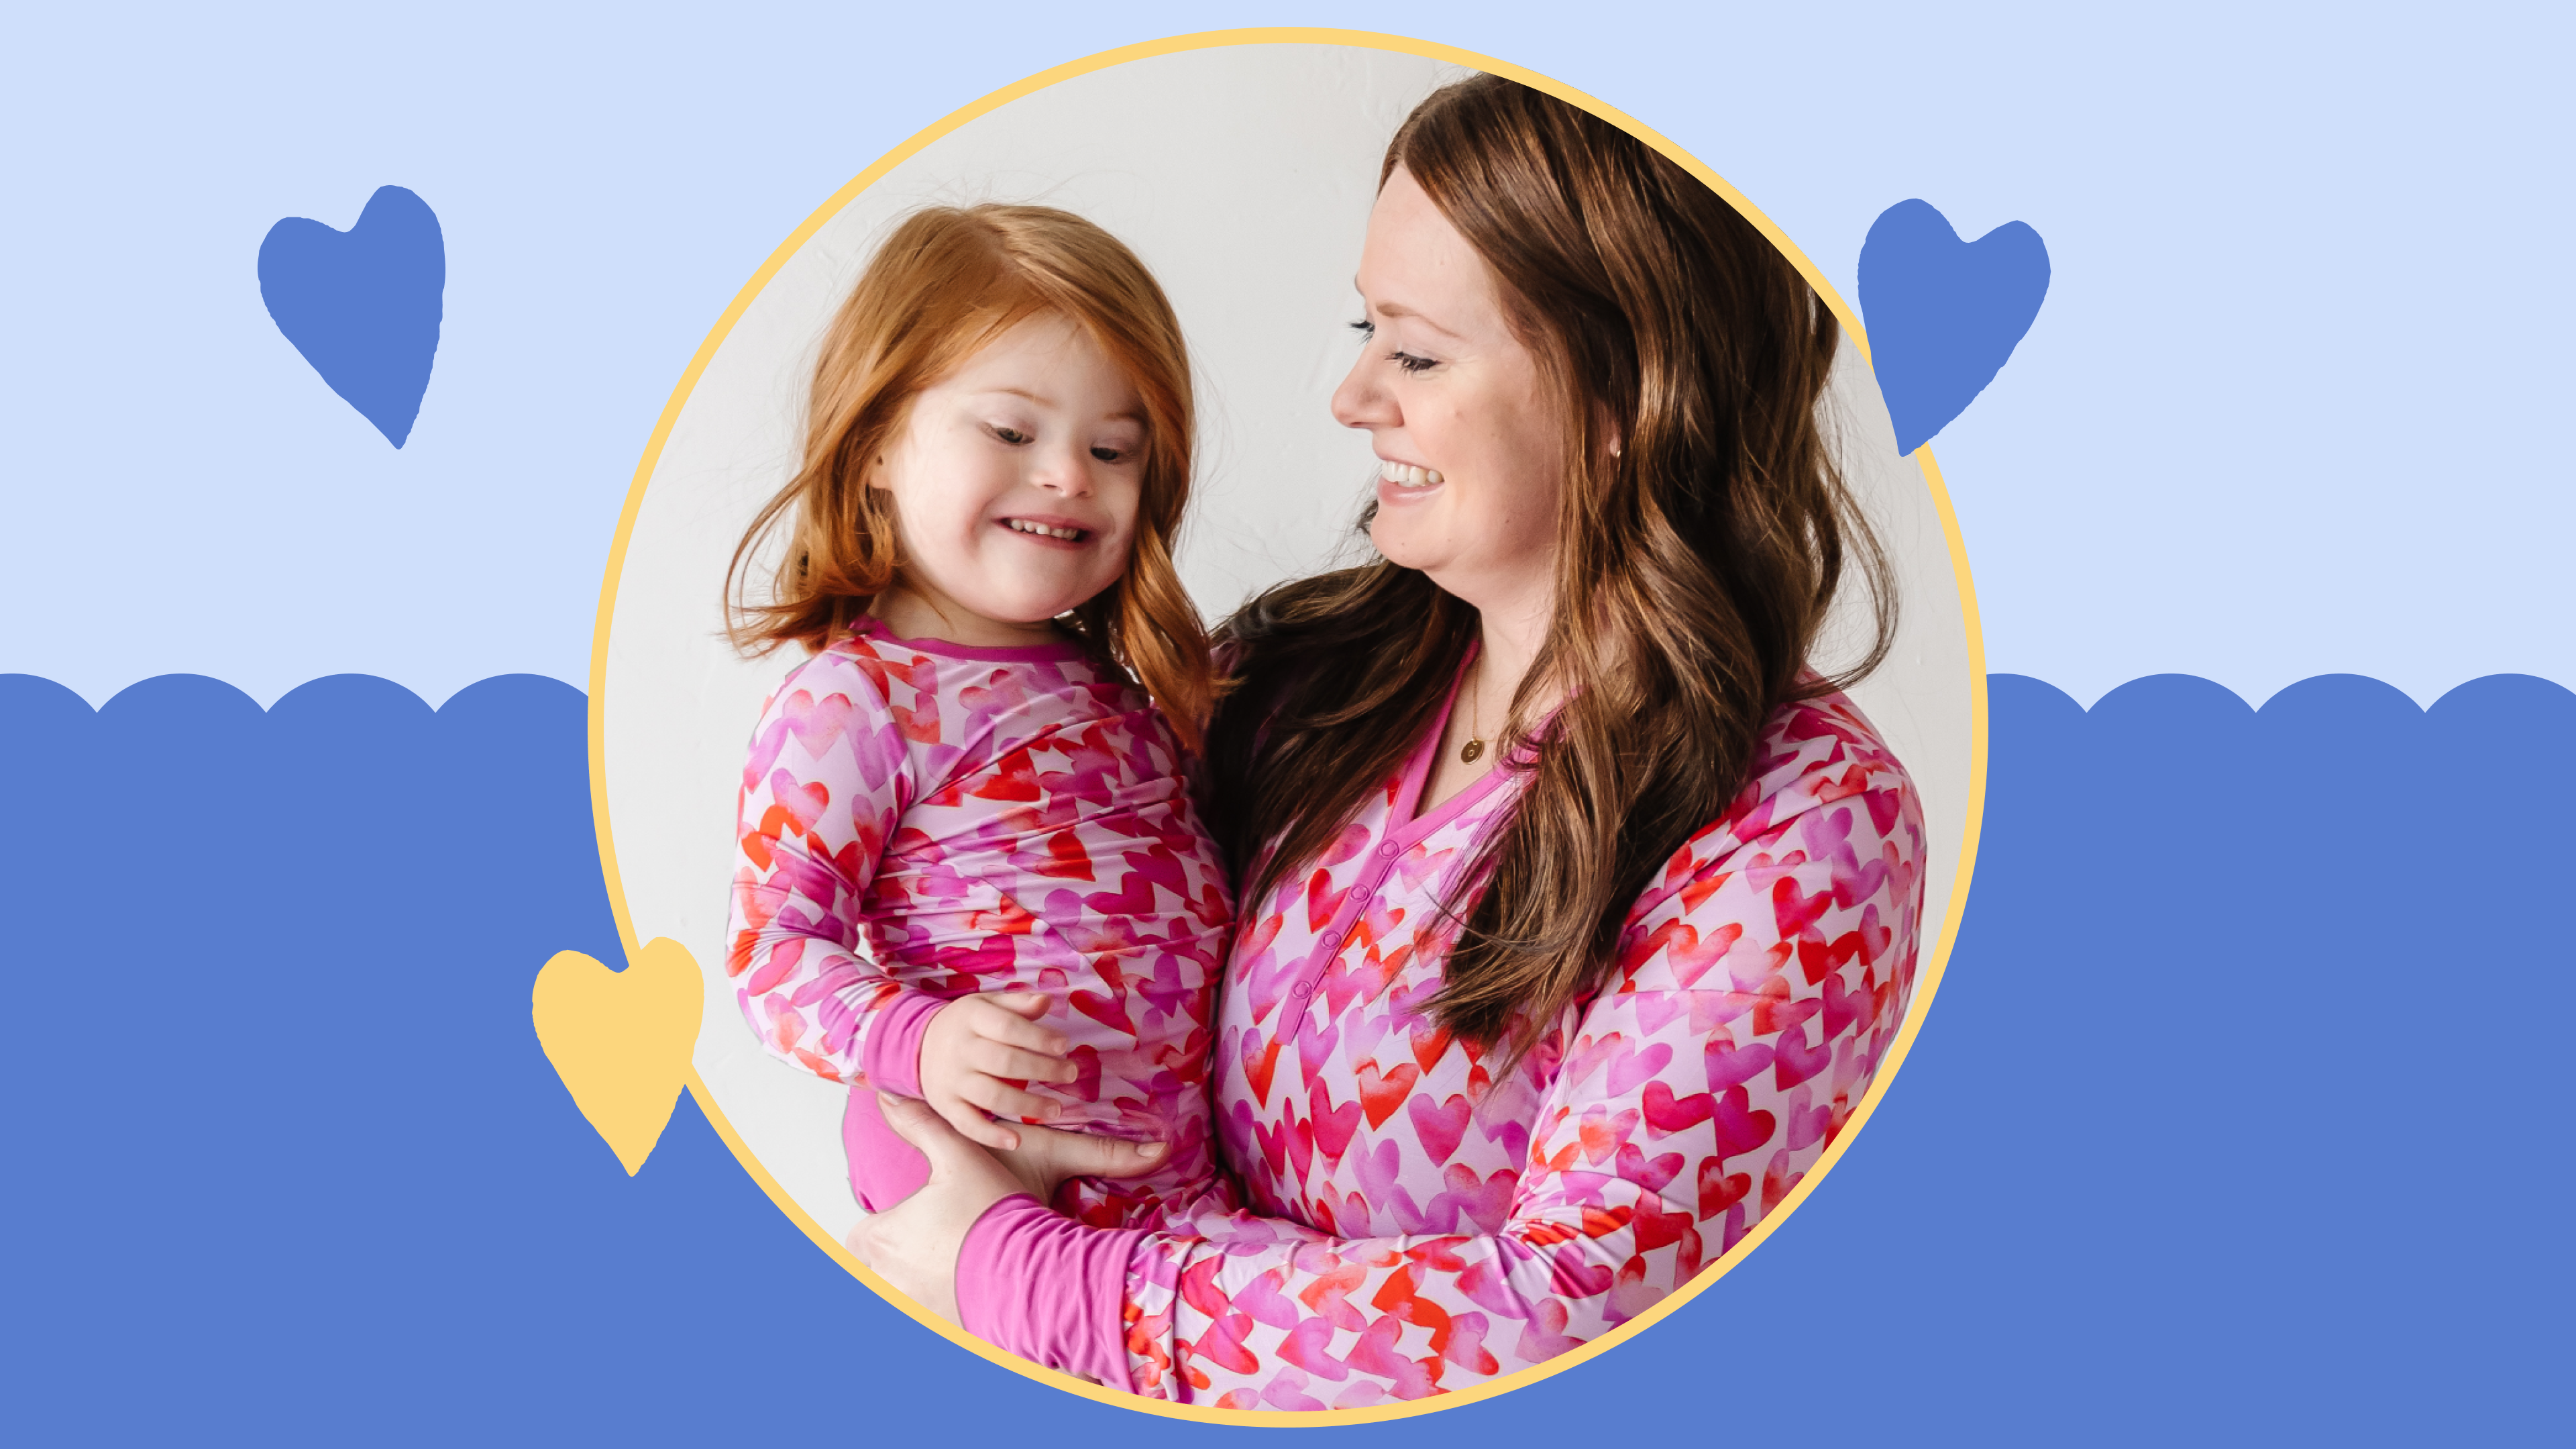 Parenting With Love: A Heartfelt Q&A for Down Syndrome Awareness Month